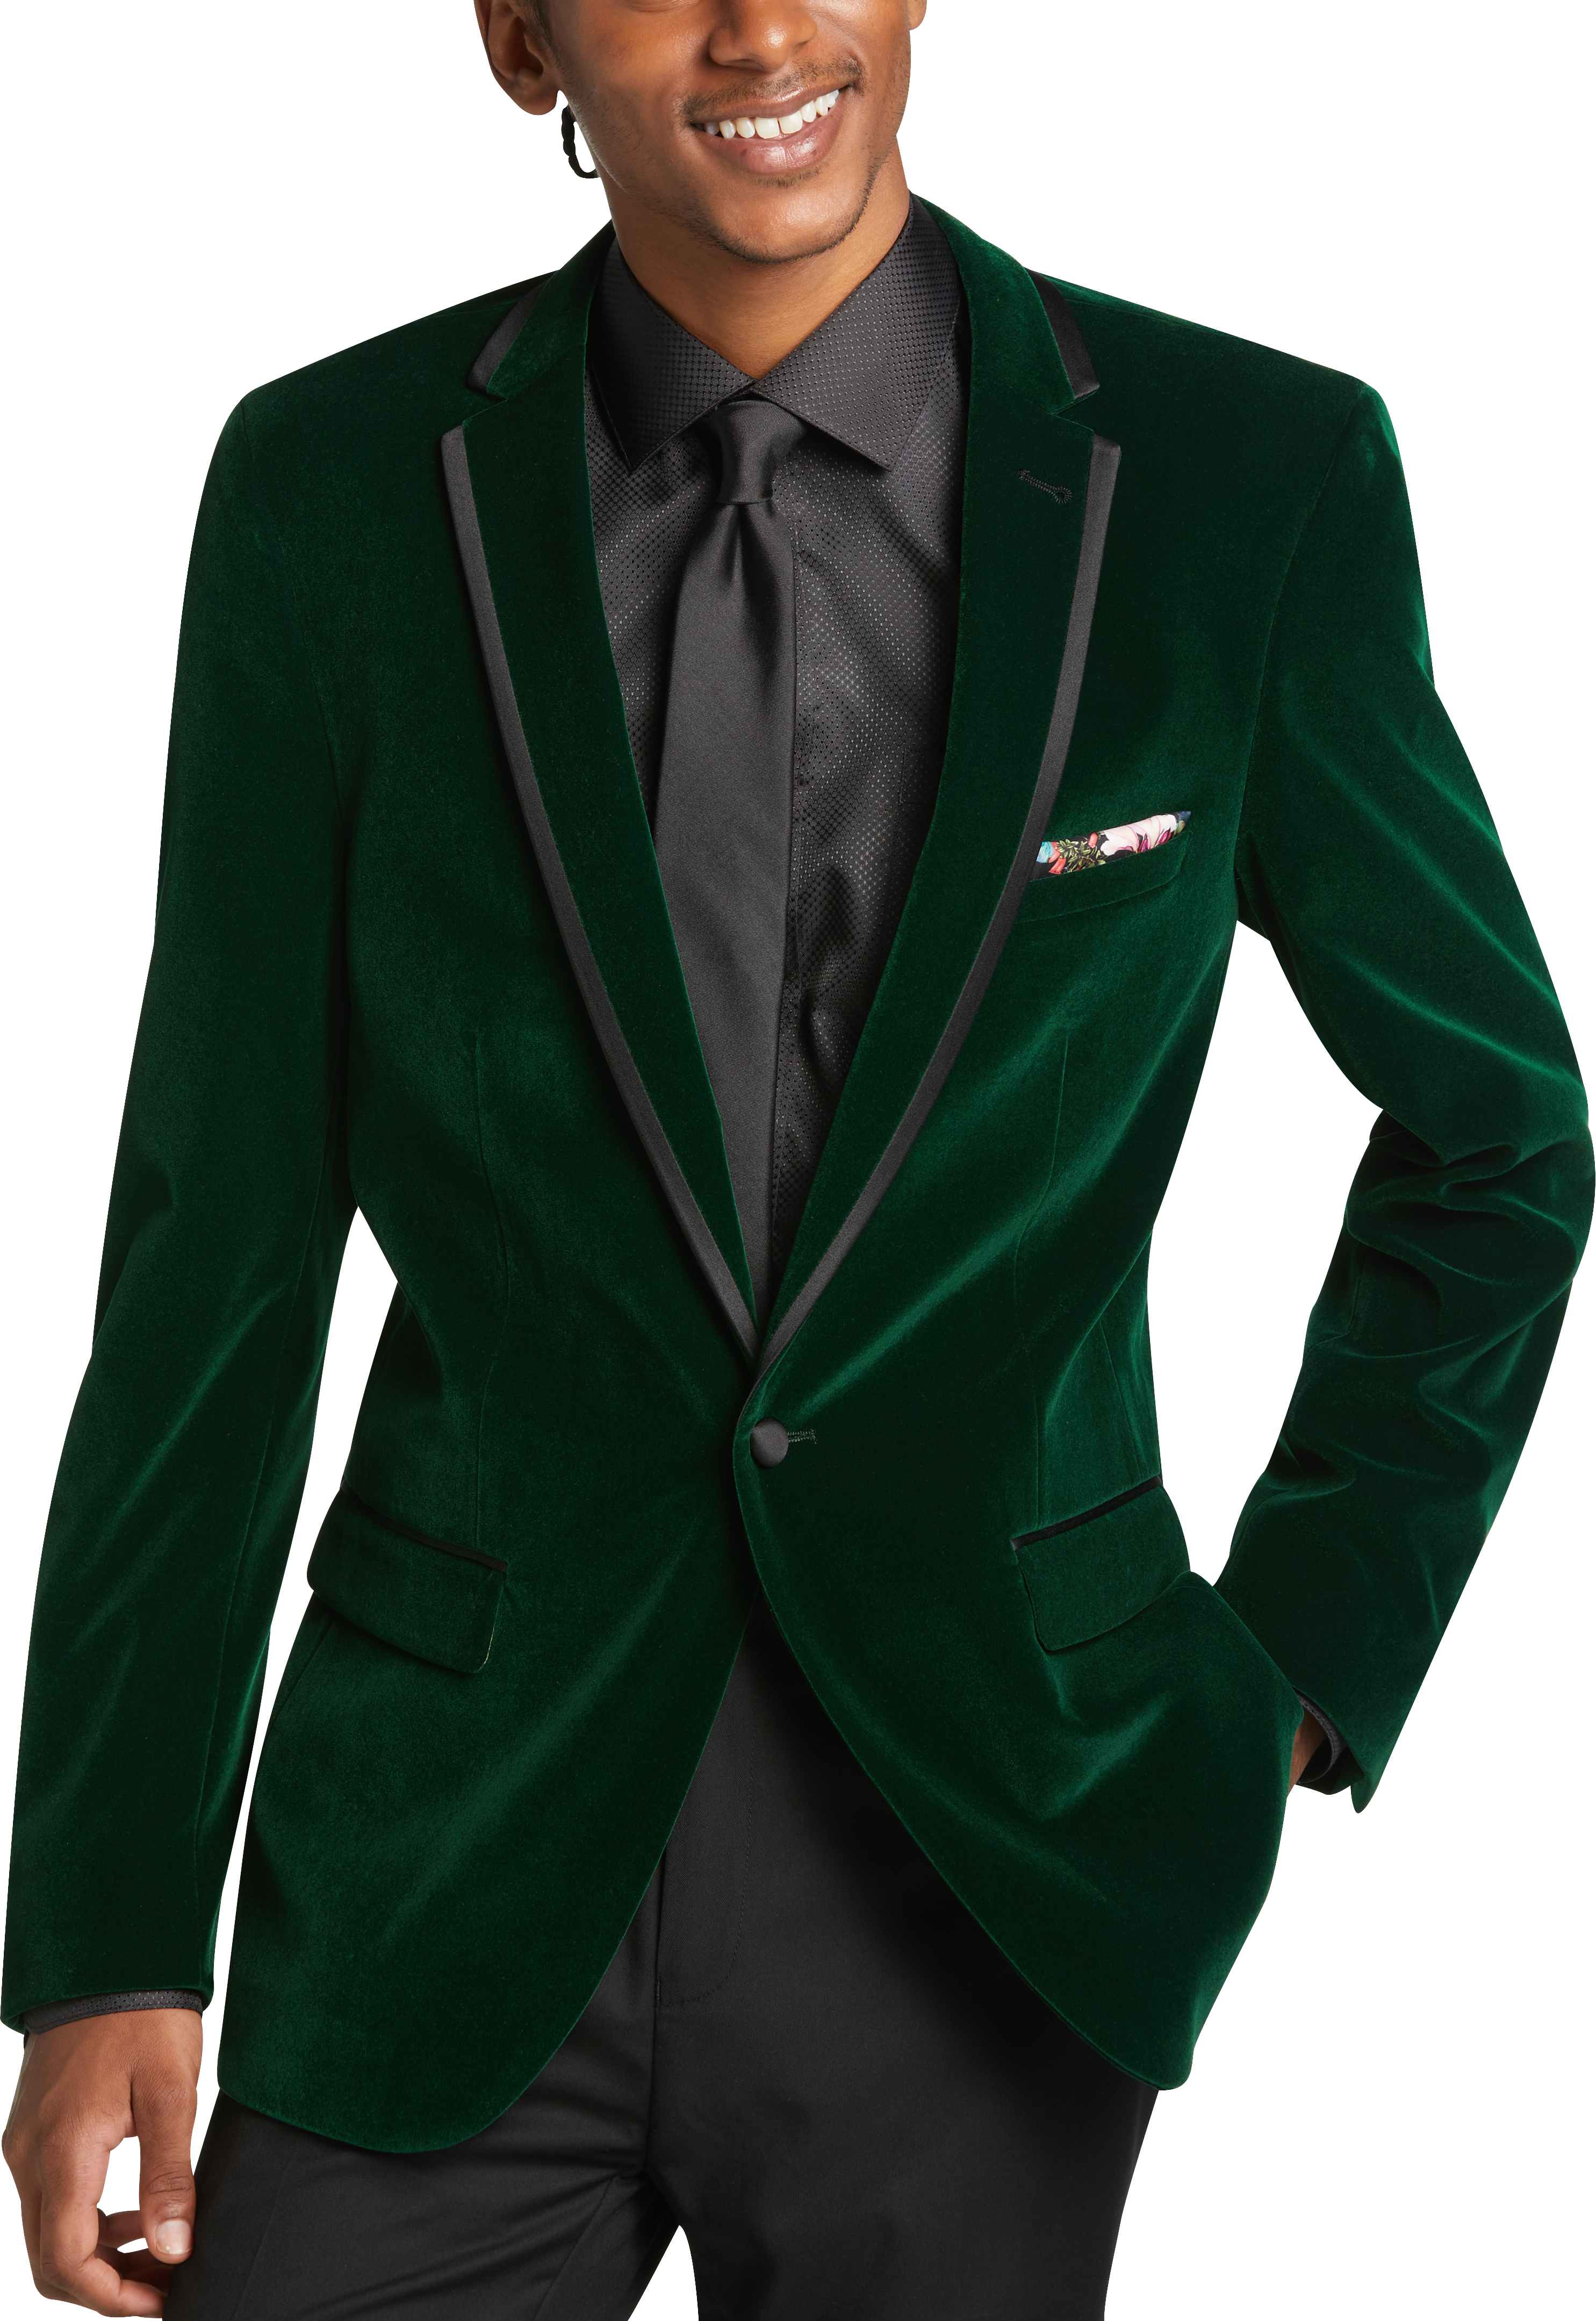 Emerald Green Suit And Black Pant Mens Suits Green, Casual, For